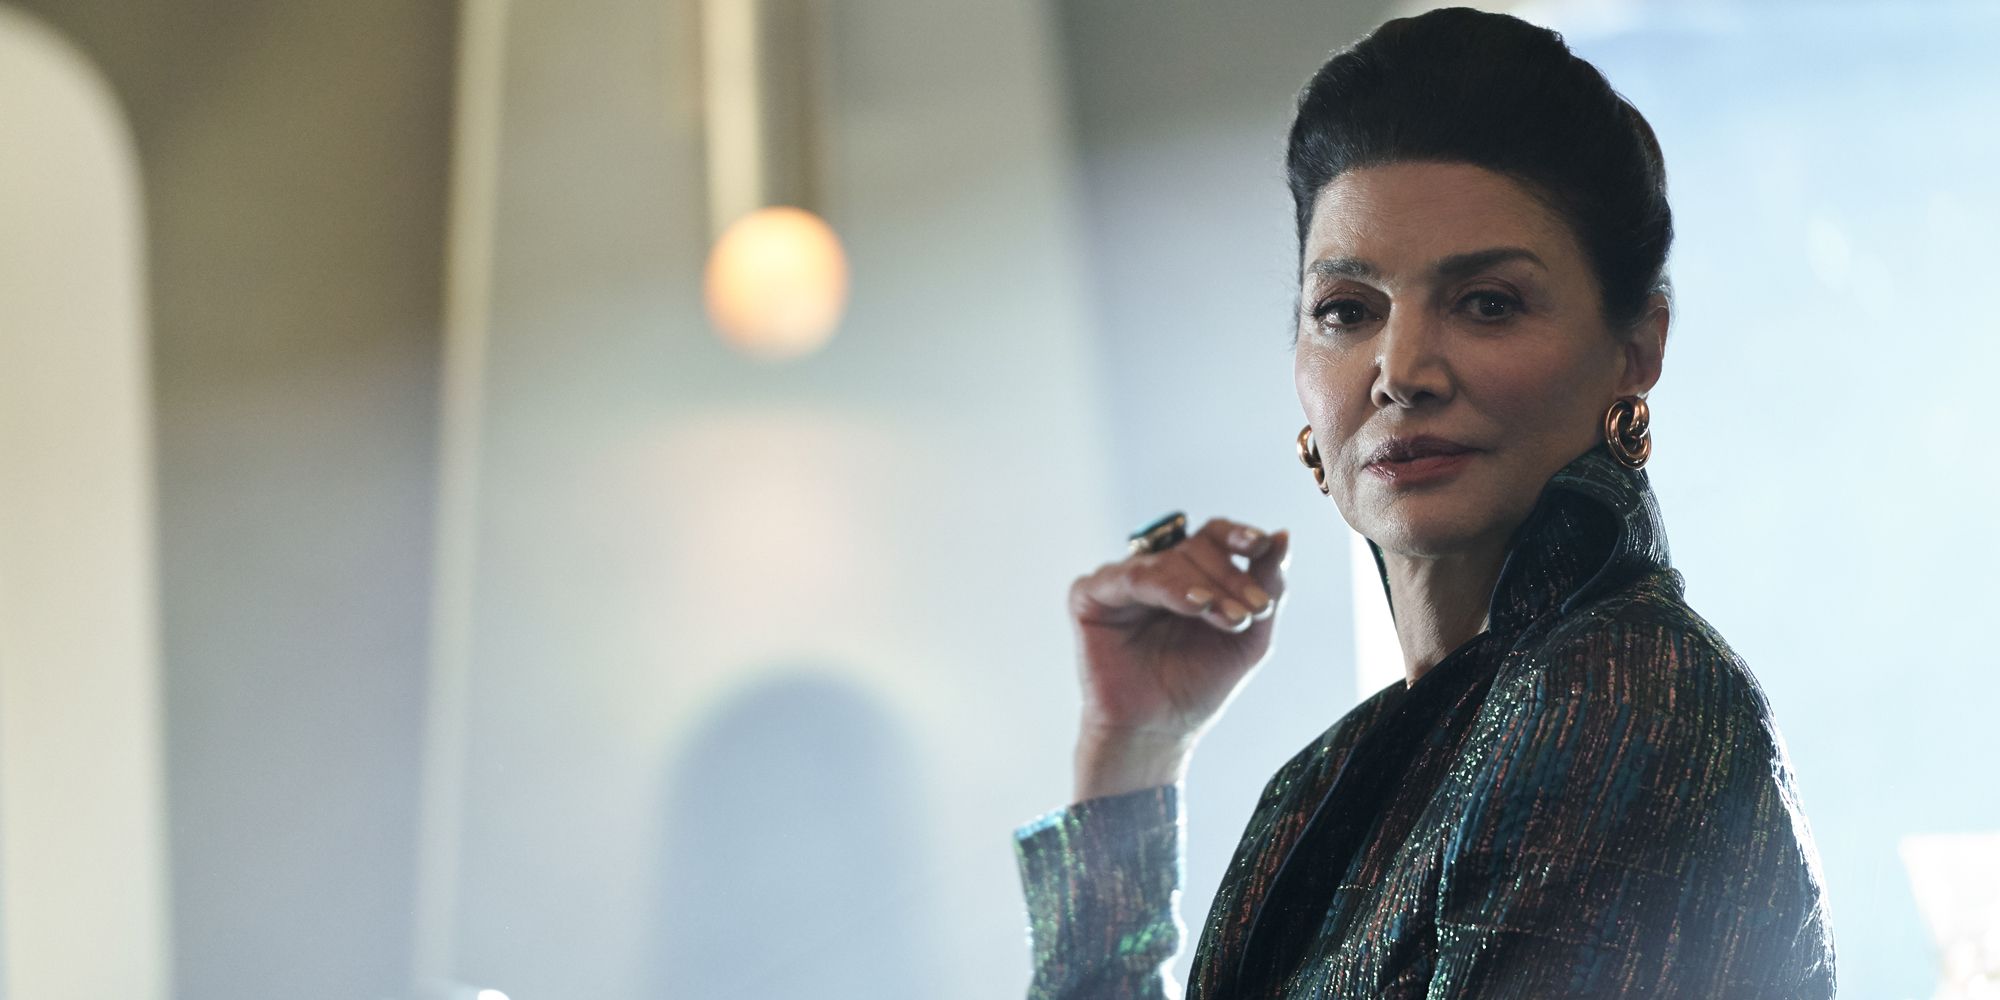 Avasarala, as portrayed by Shohreh Aghdashloo in The Expanse